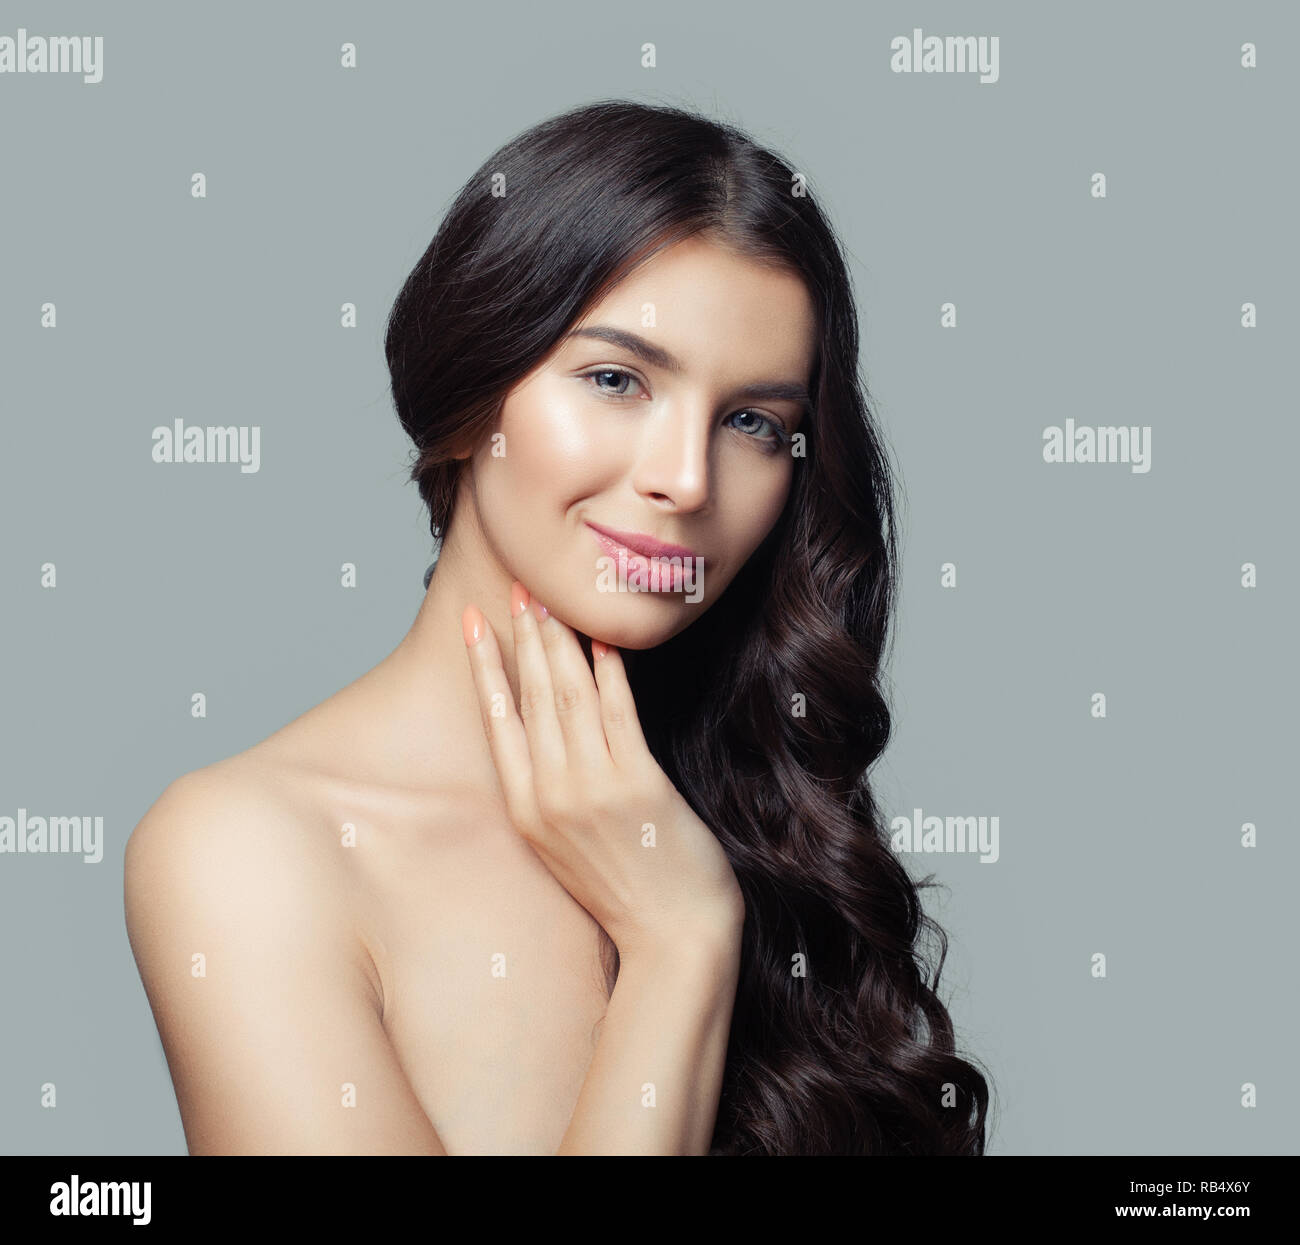 Smiling woman with long dark brown hair portrait Stock Photo